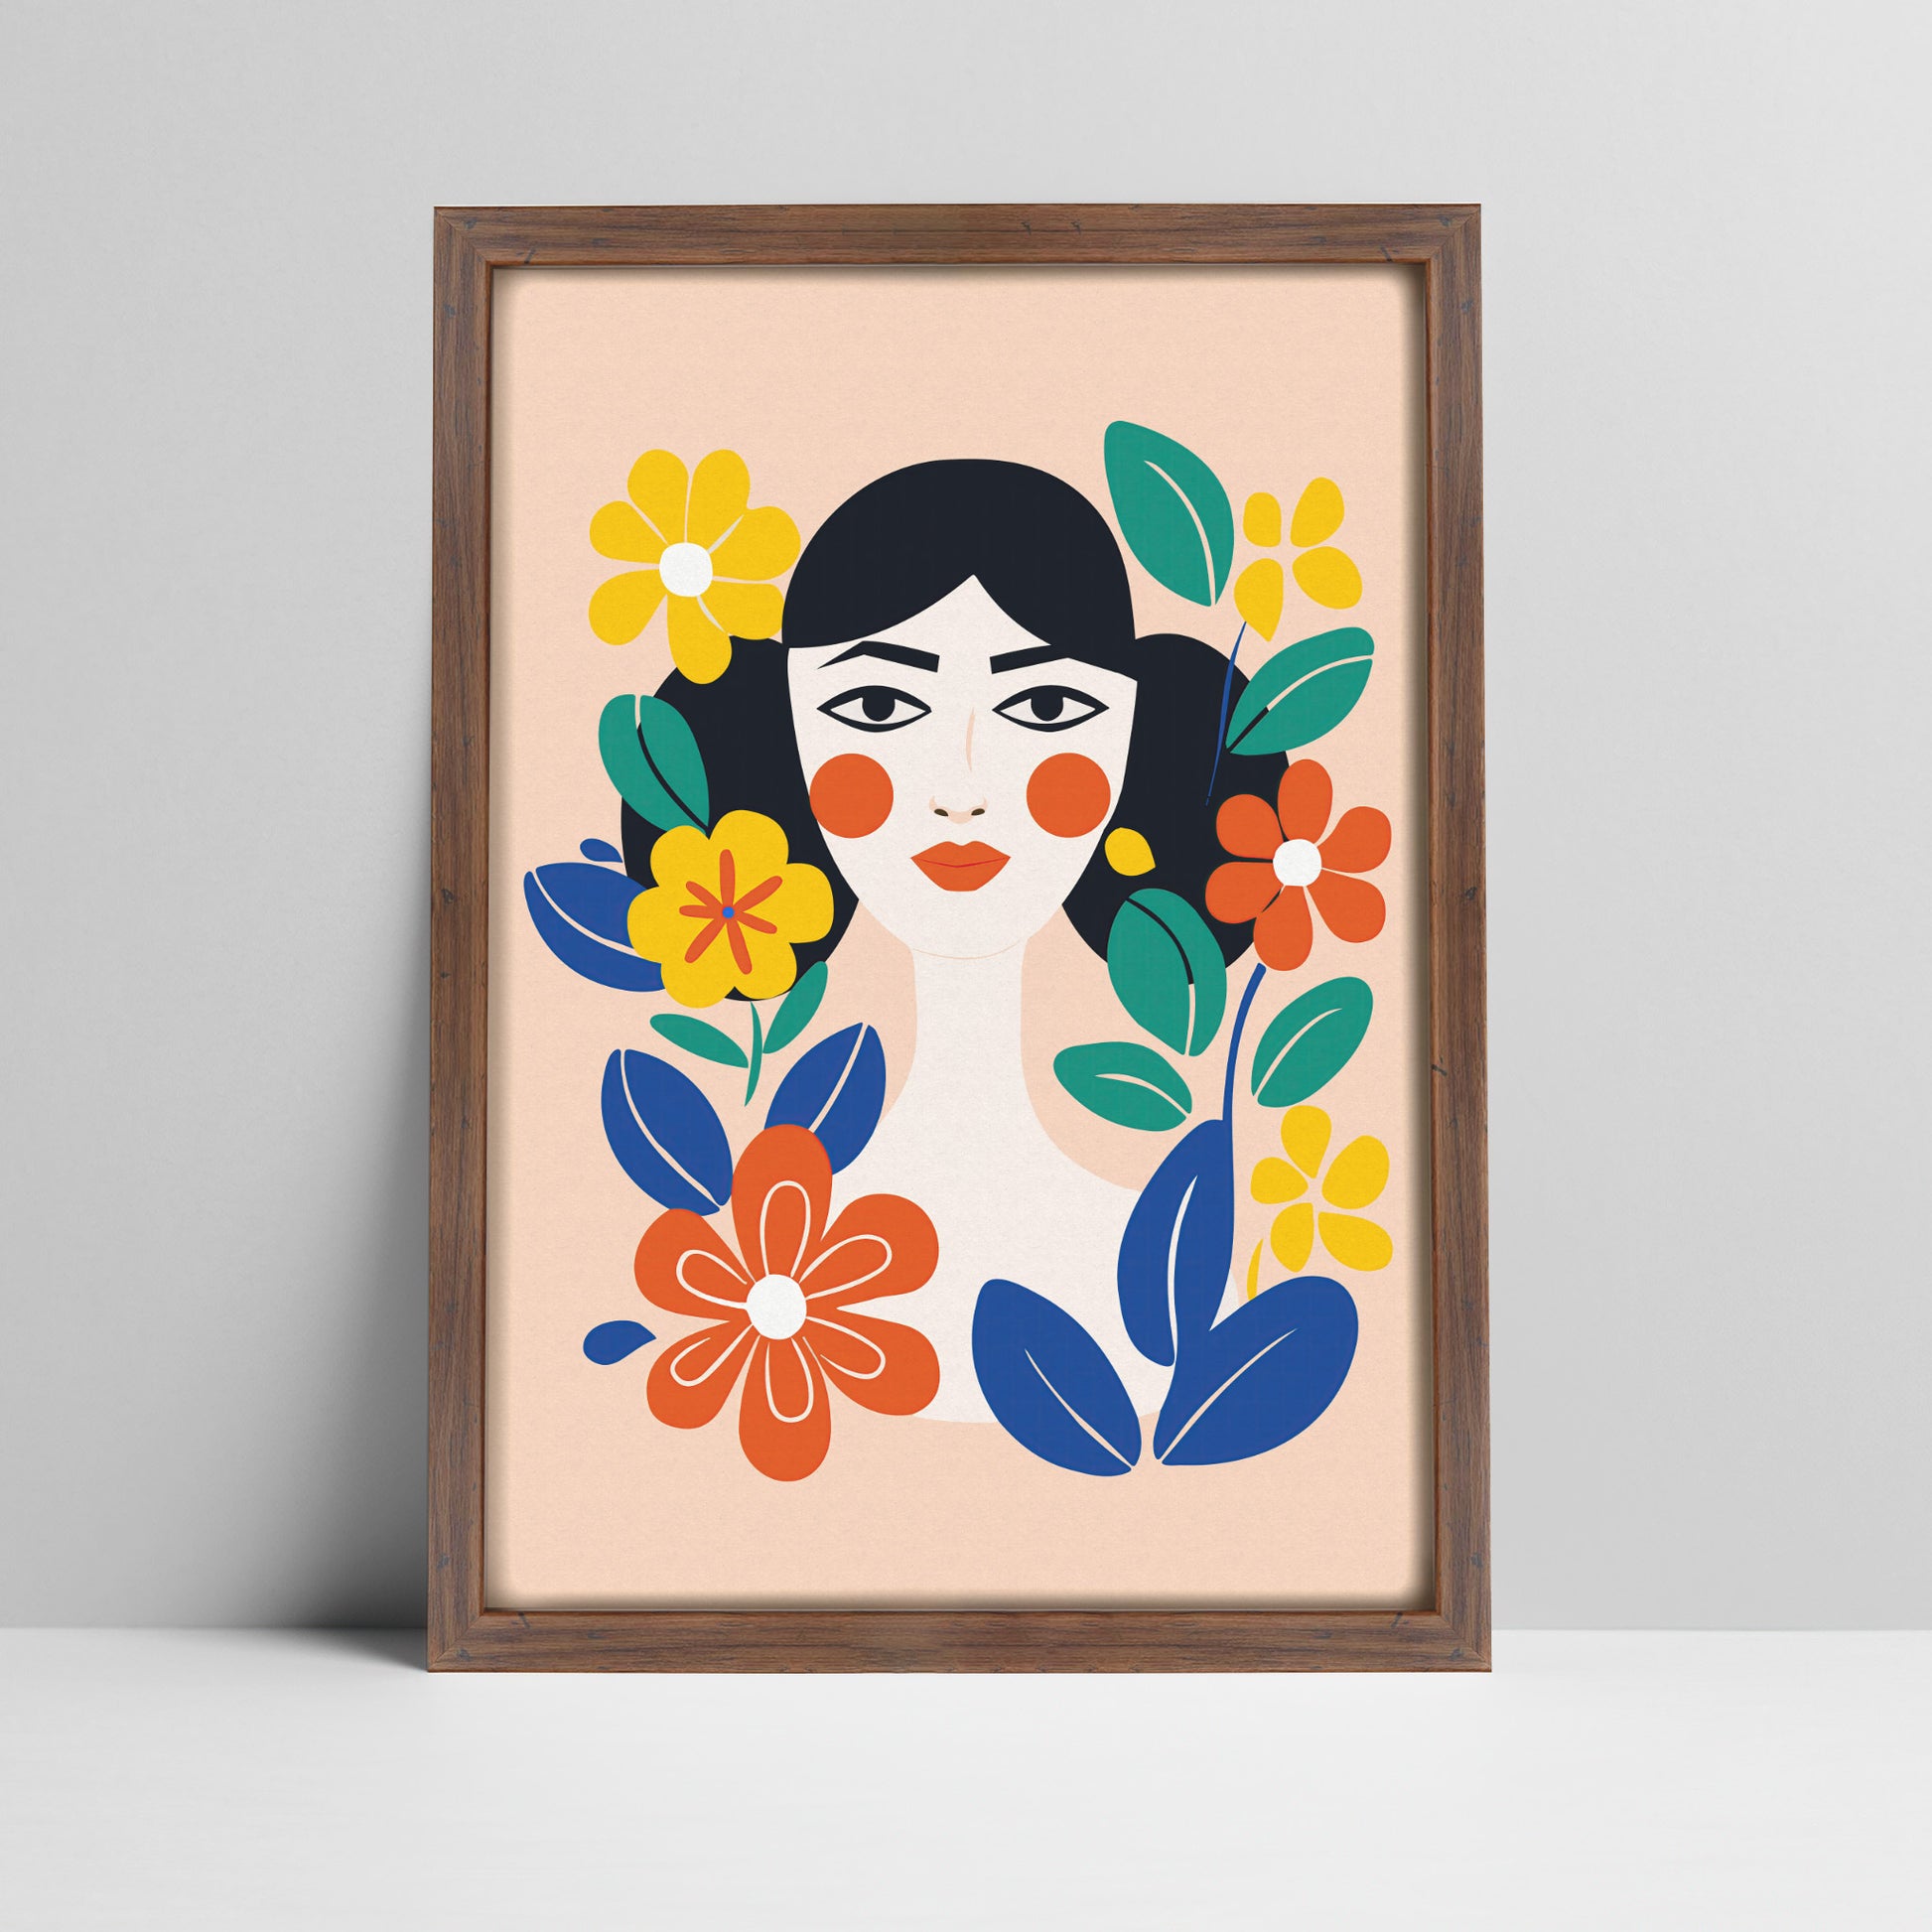 Art print of woman with stylized floral design in a dark wood frame